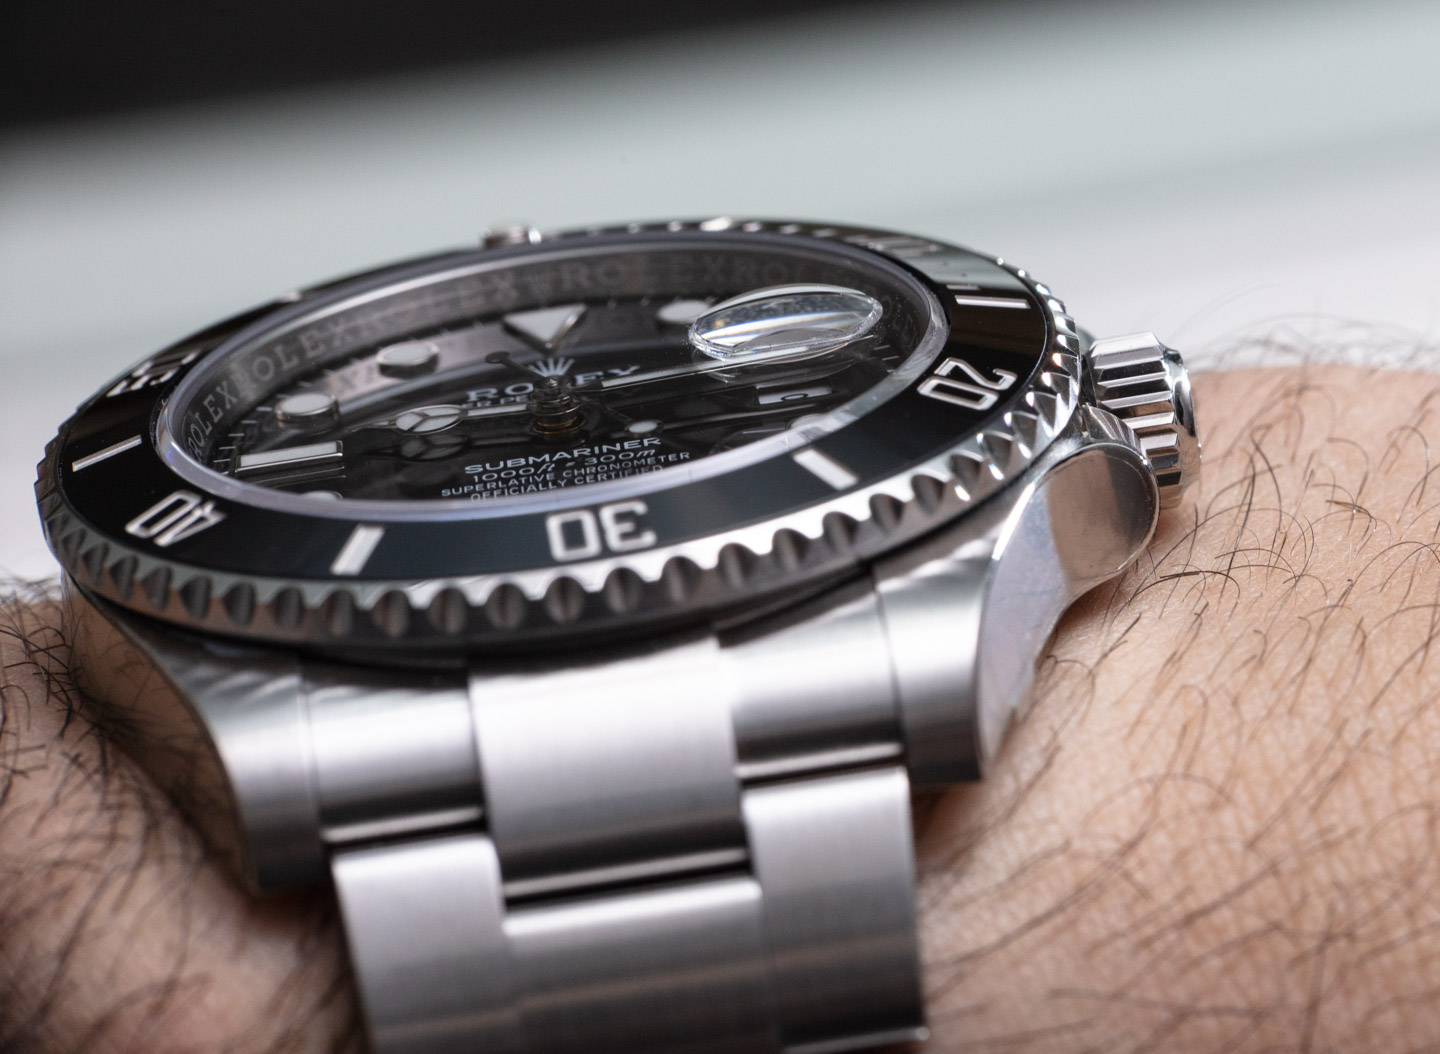 Hands-on Review: Rolex Submariner Date 126610LV, Time and Watches